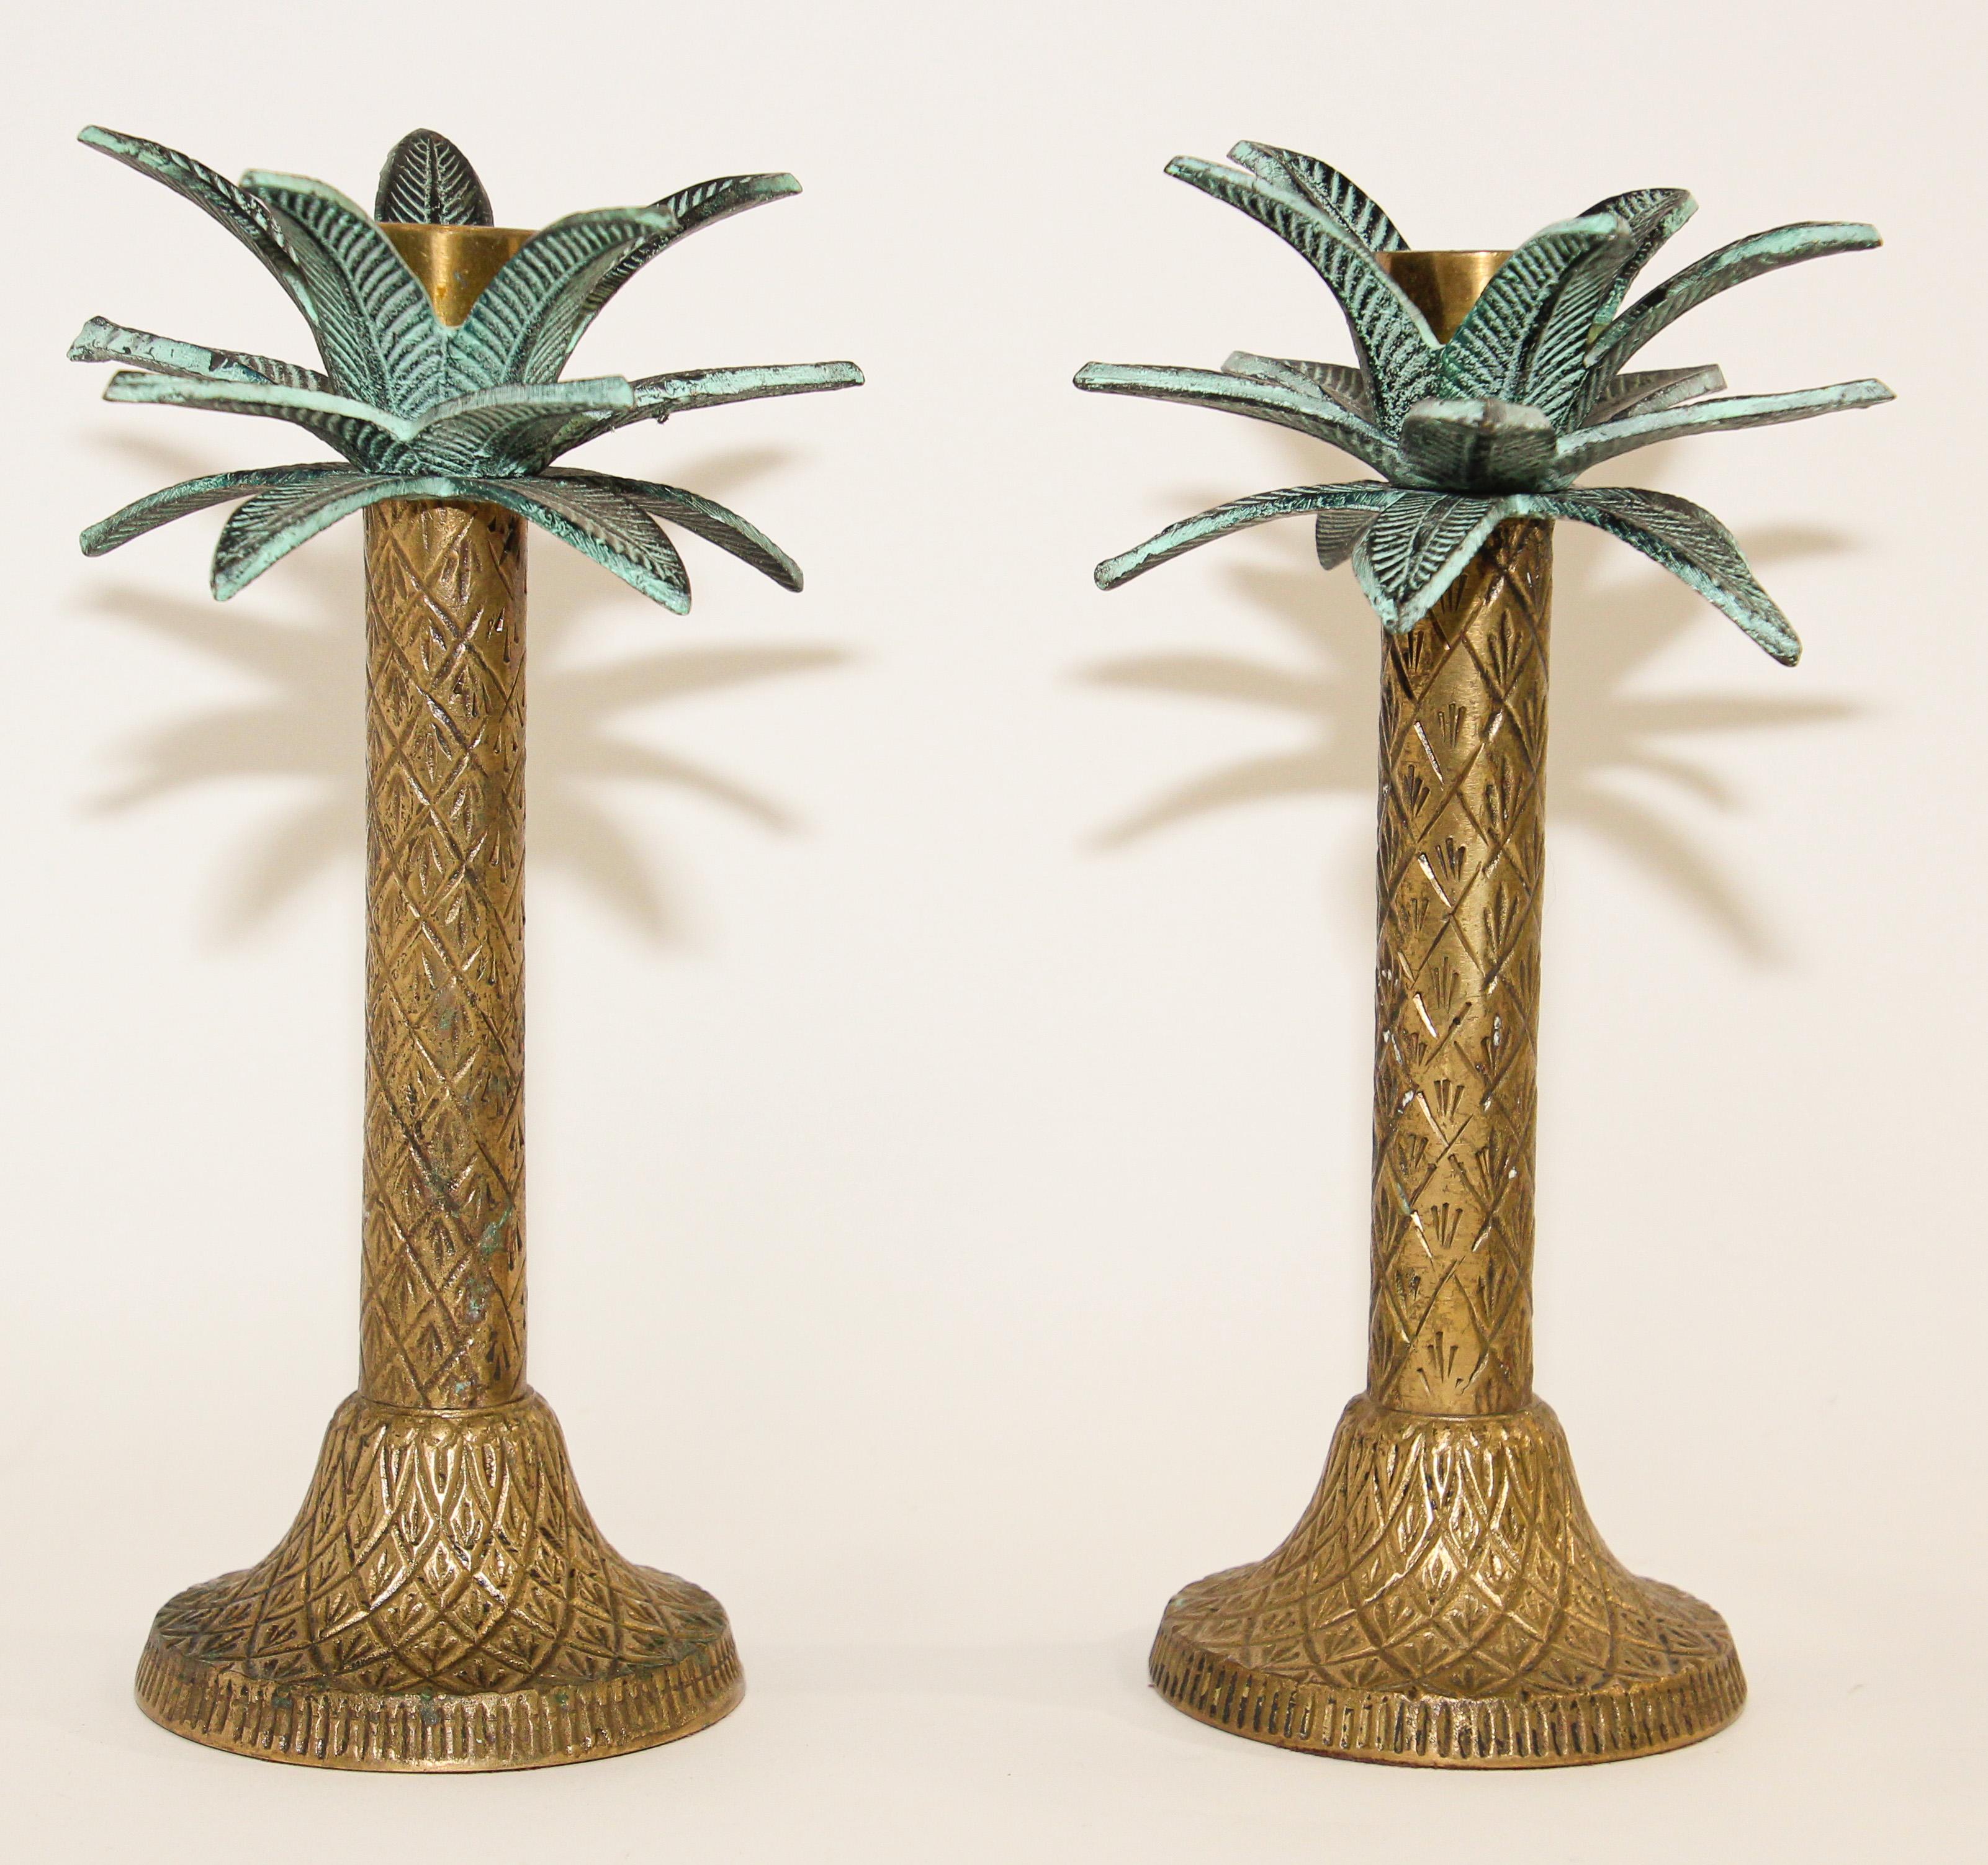 Vintage Set of two brass palm tree candlestick holders.
Gorgeous pair of brass candlestick holders.
They are as stately as the tropical palm trees they have been designed after.
Vintage, good condition, no hallmarks.
Patina consistent to vintage